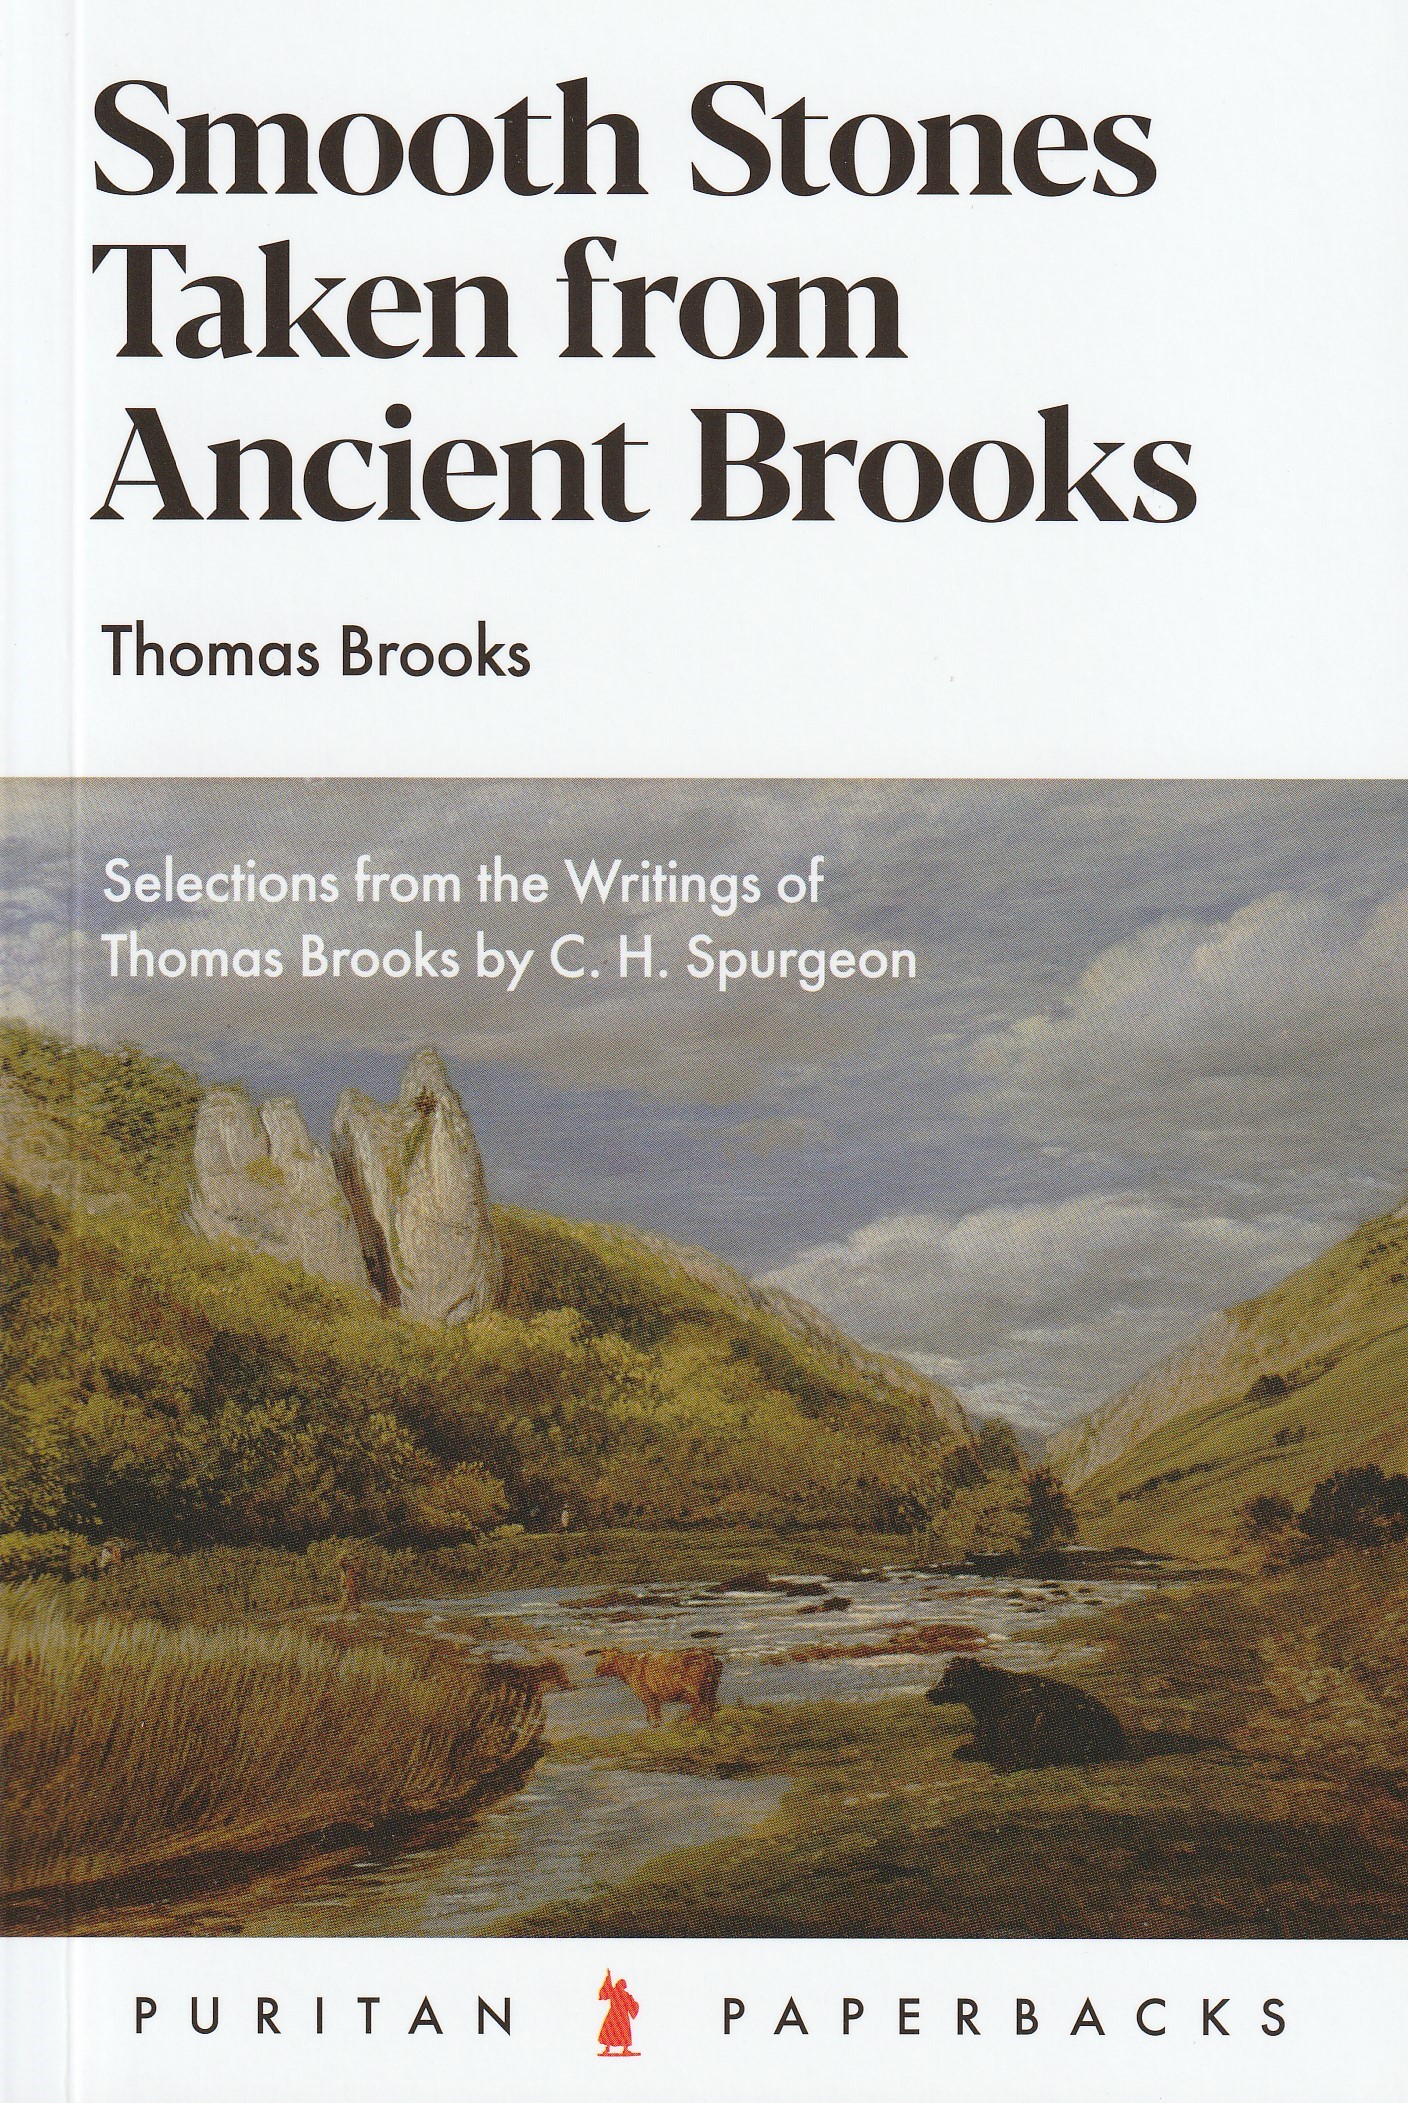 Smooth Stones From Ancient Brooks: Selections from the Writings of Thomas Brooks by C.H. Spurgeon